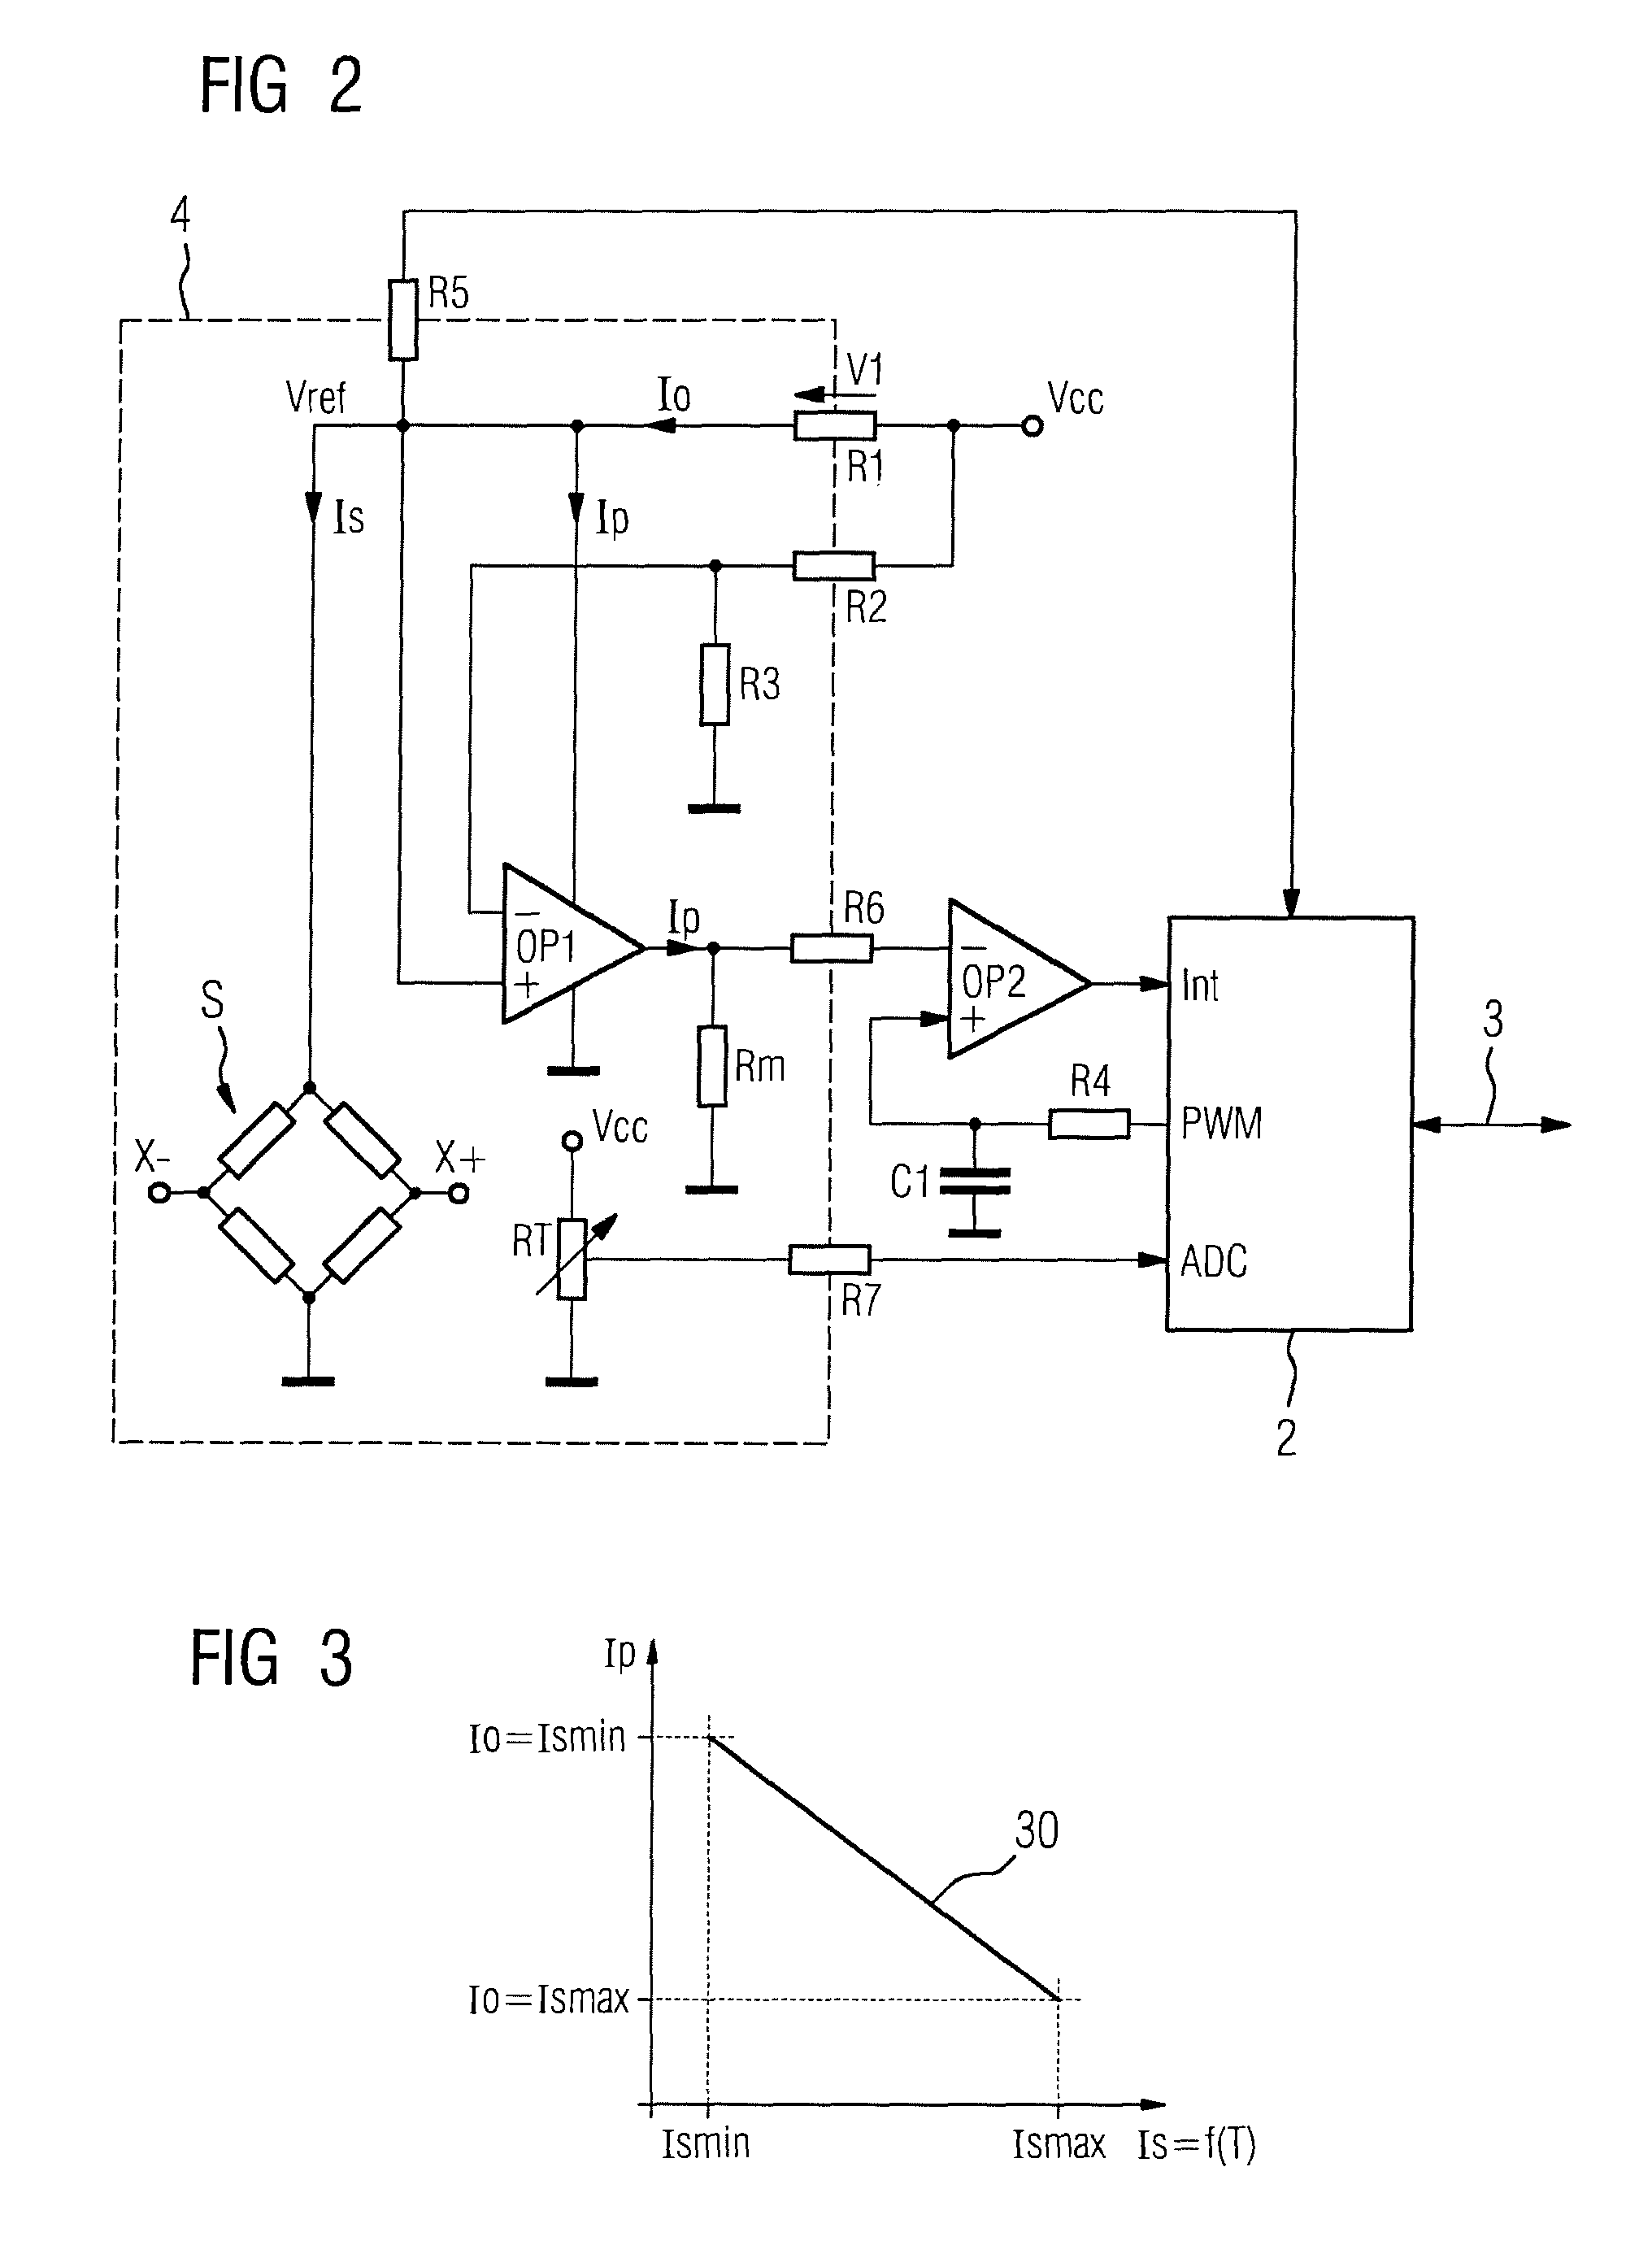 Measurement transducer for process instrumentation, and method for monitoring the state of its sensor